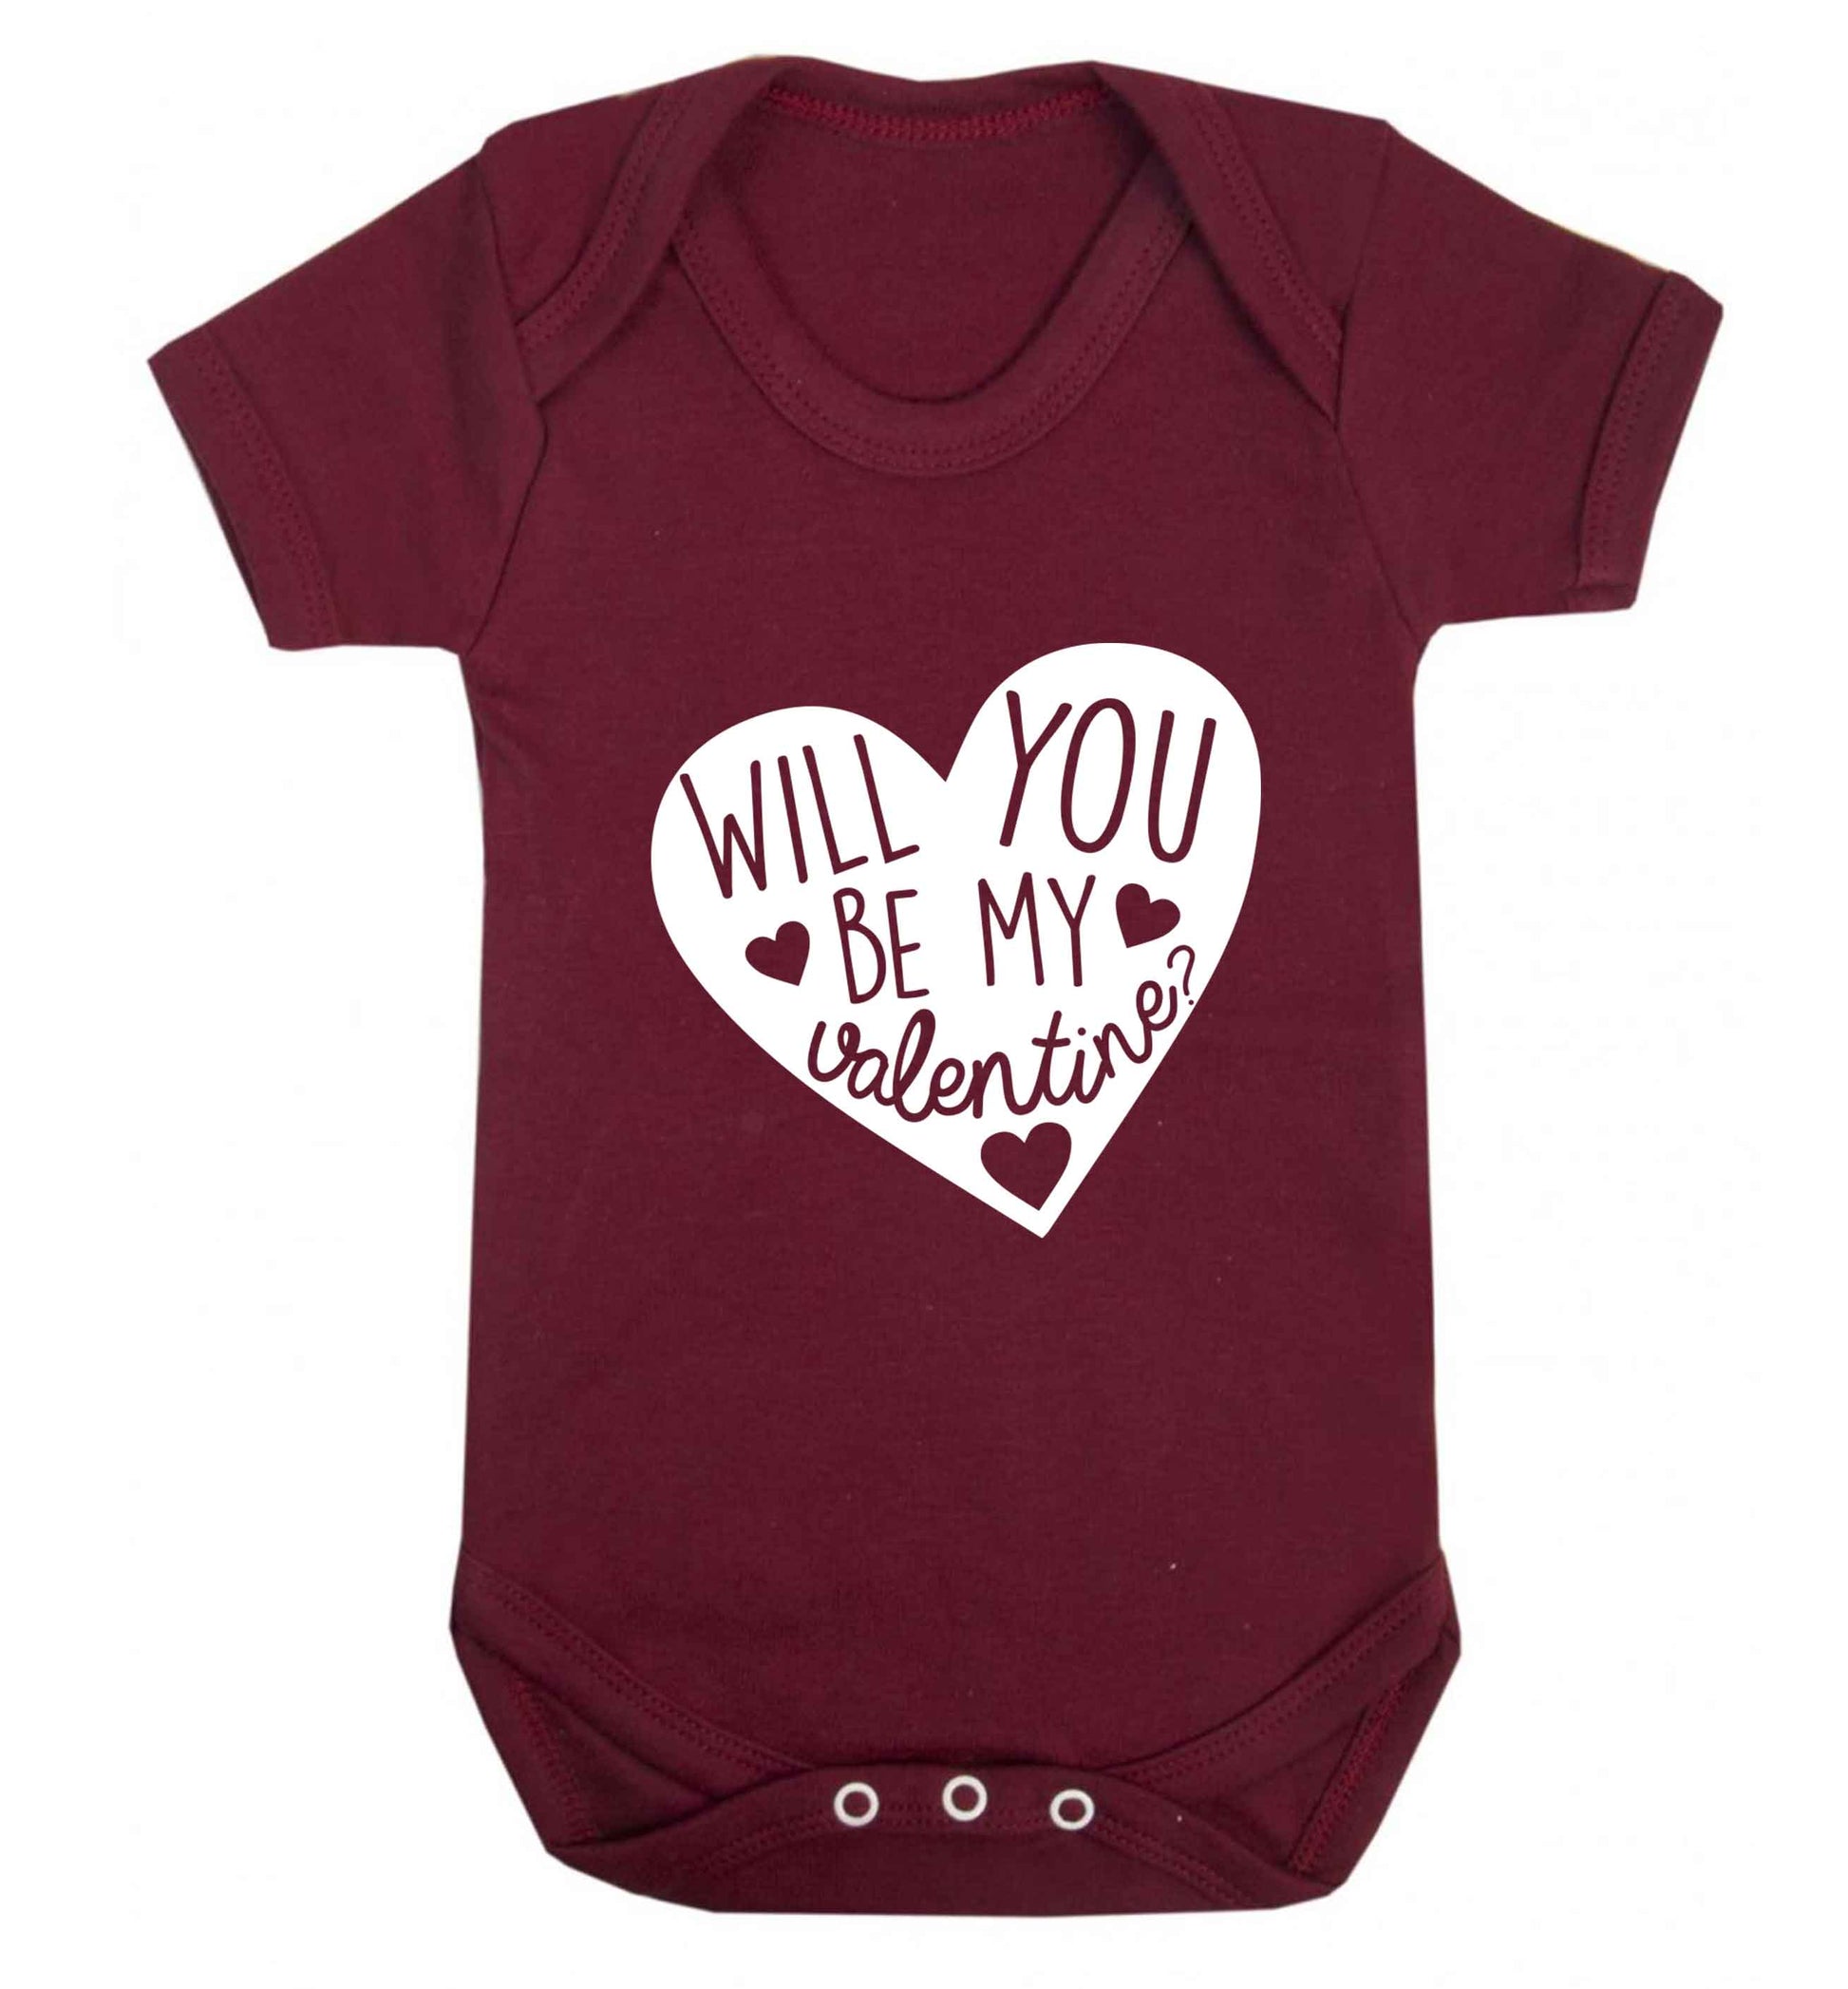 Will you be my valentine? baby vest maroon 18-24 months